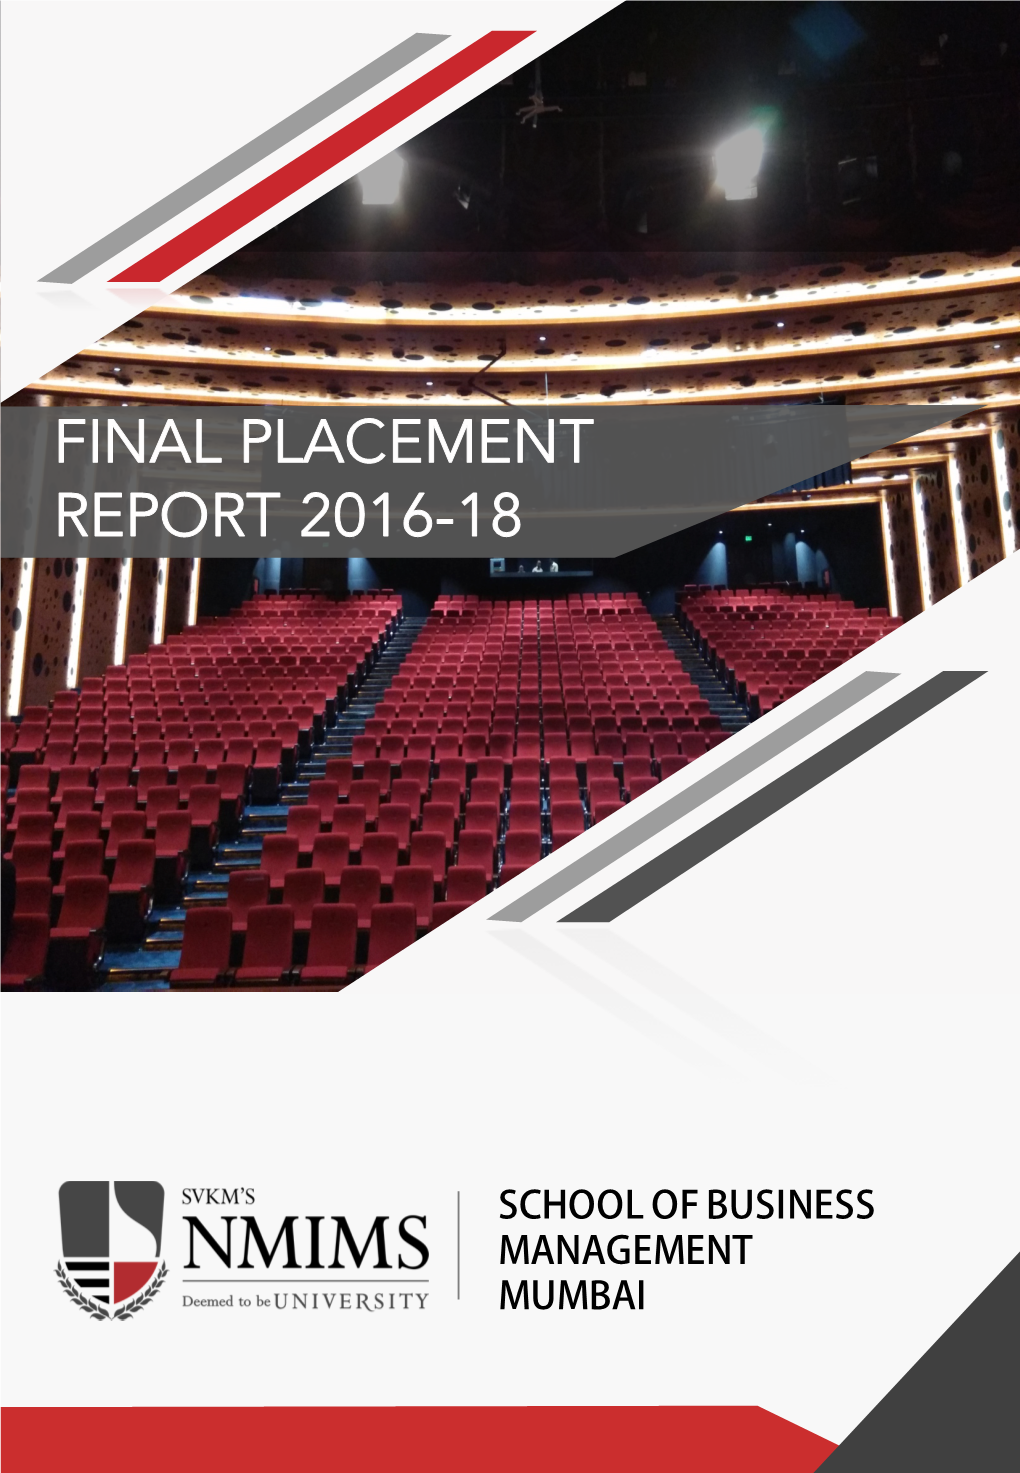 Final Placement Report 2016-18